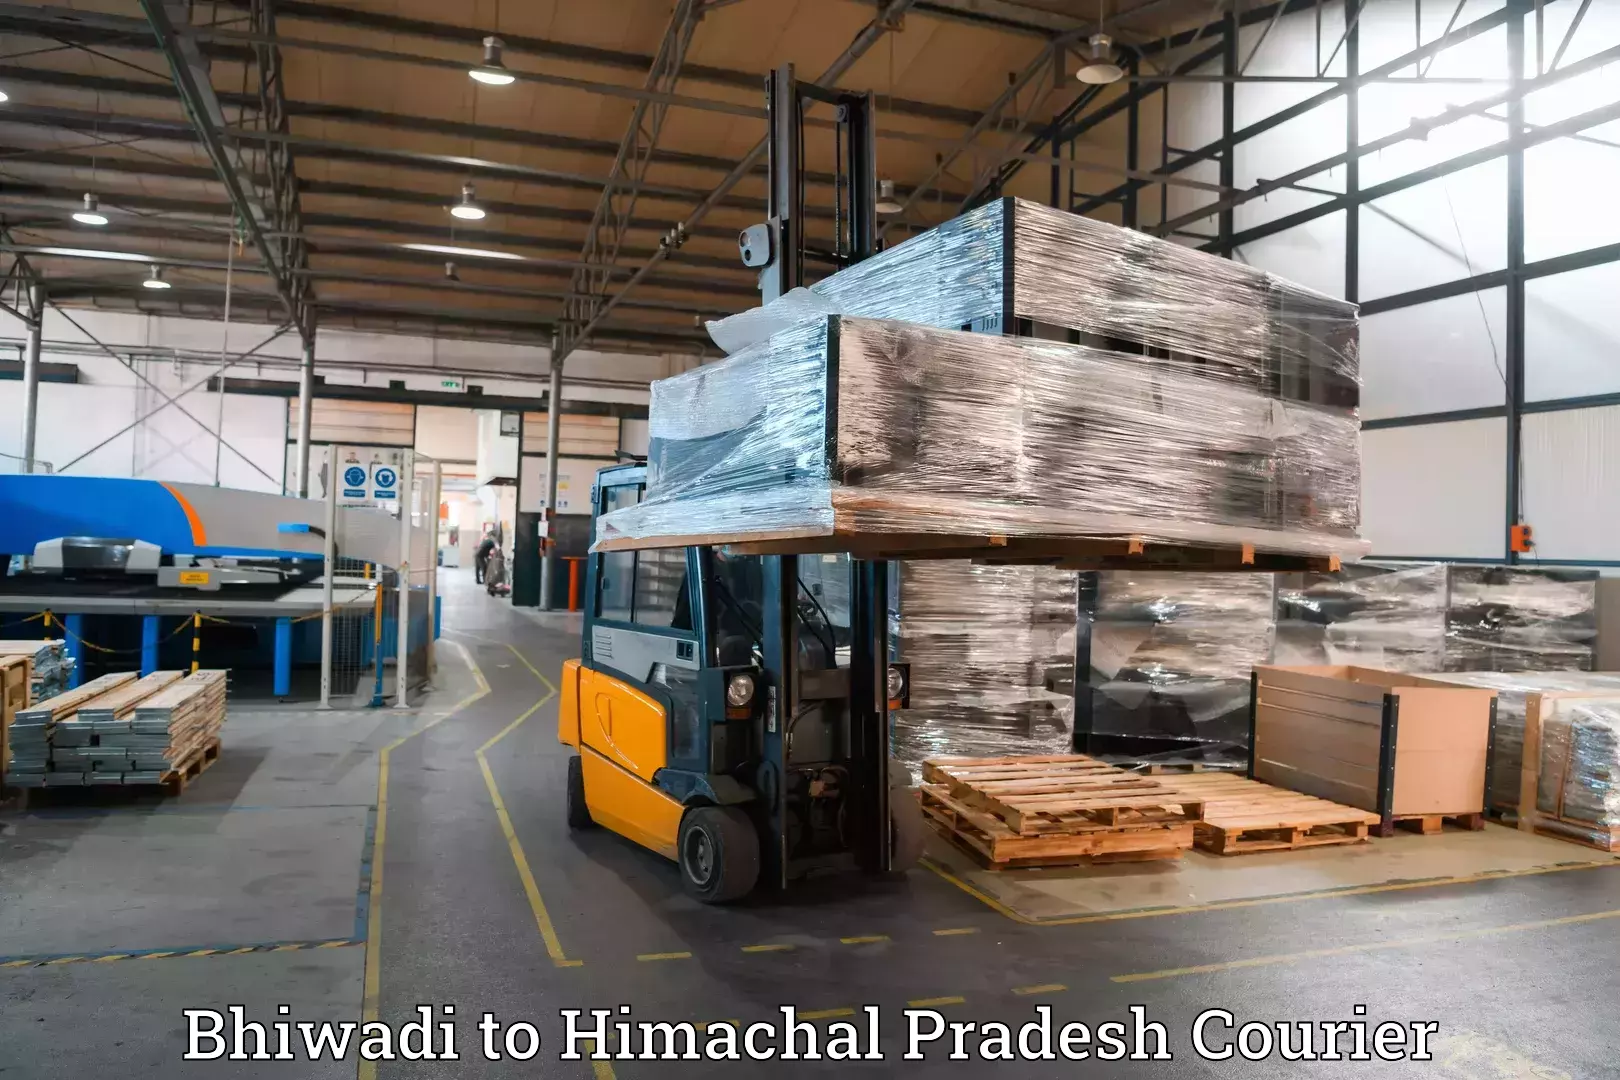 Luggage delivery app Bhiwadi to Dheera